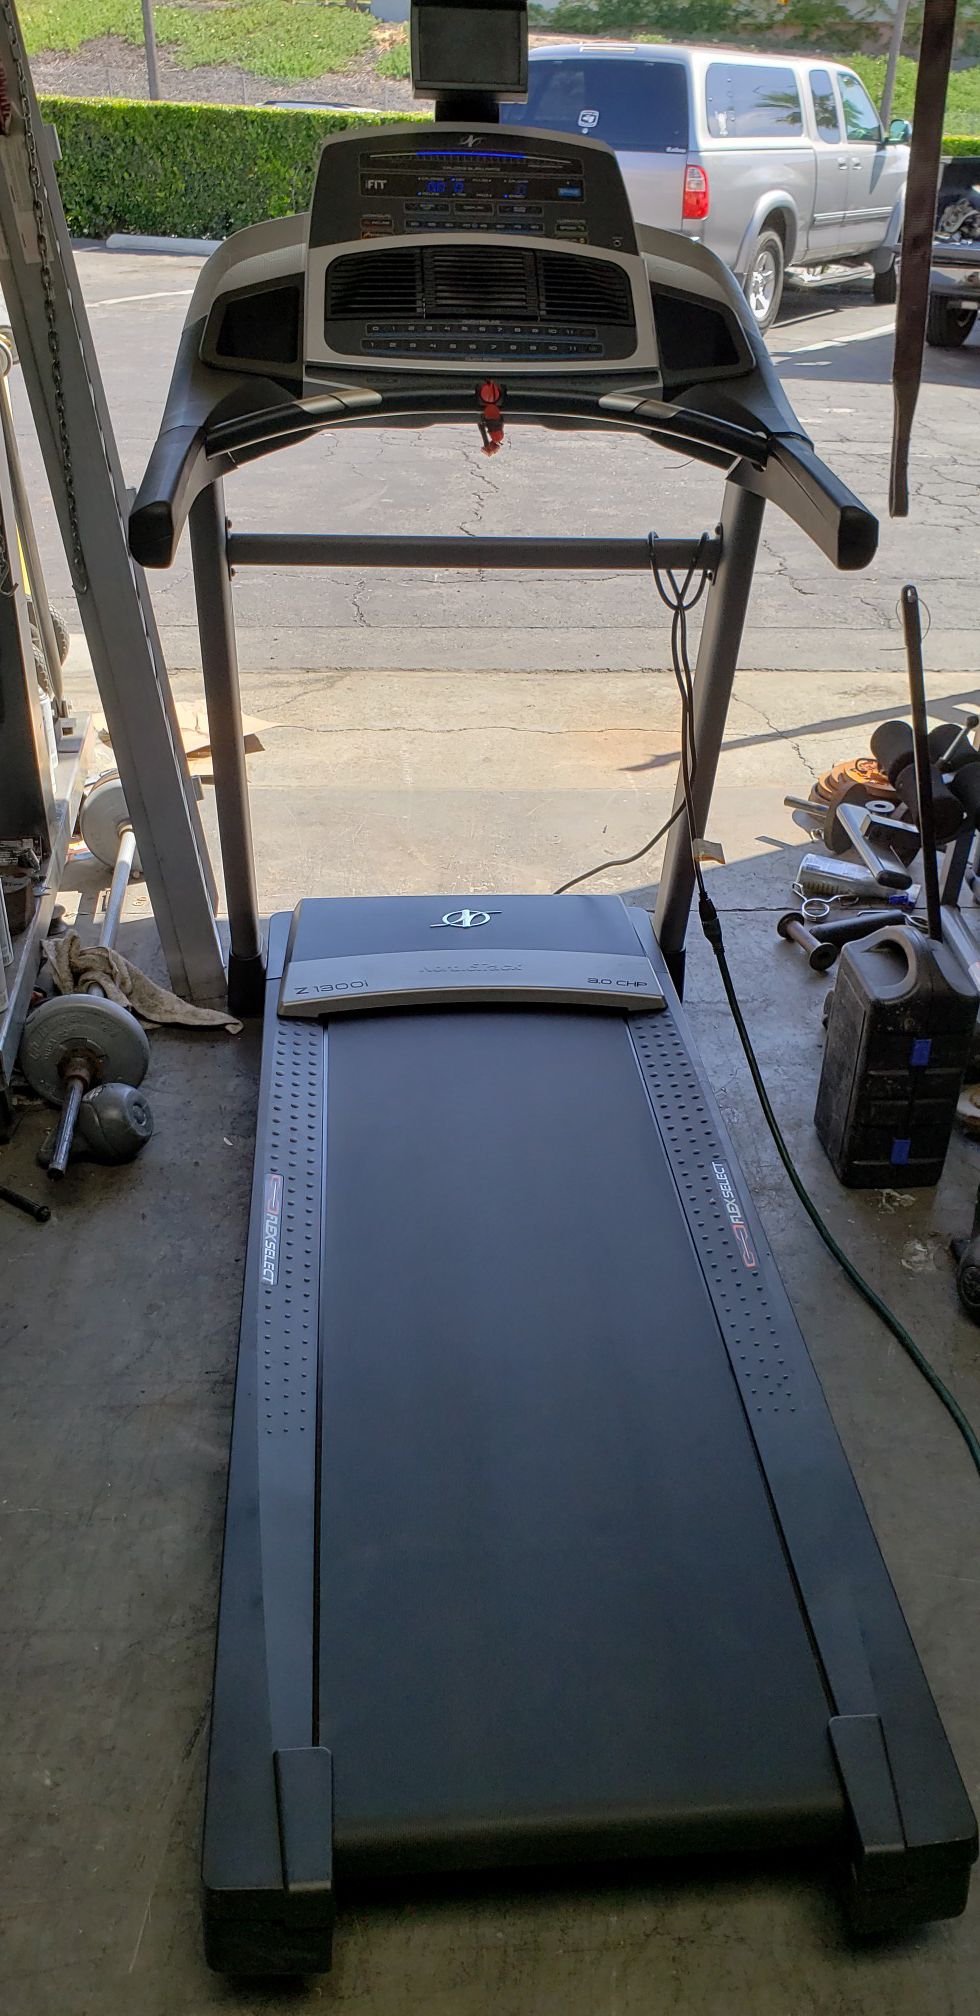 Nordictrack Z1300i treadmill 300lbs weight Capacity great cardio machine for your home gym